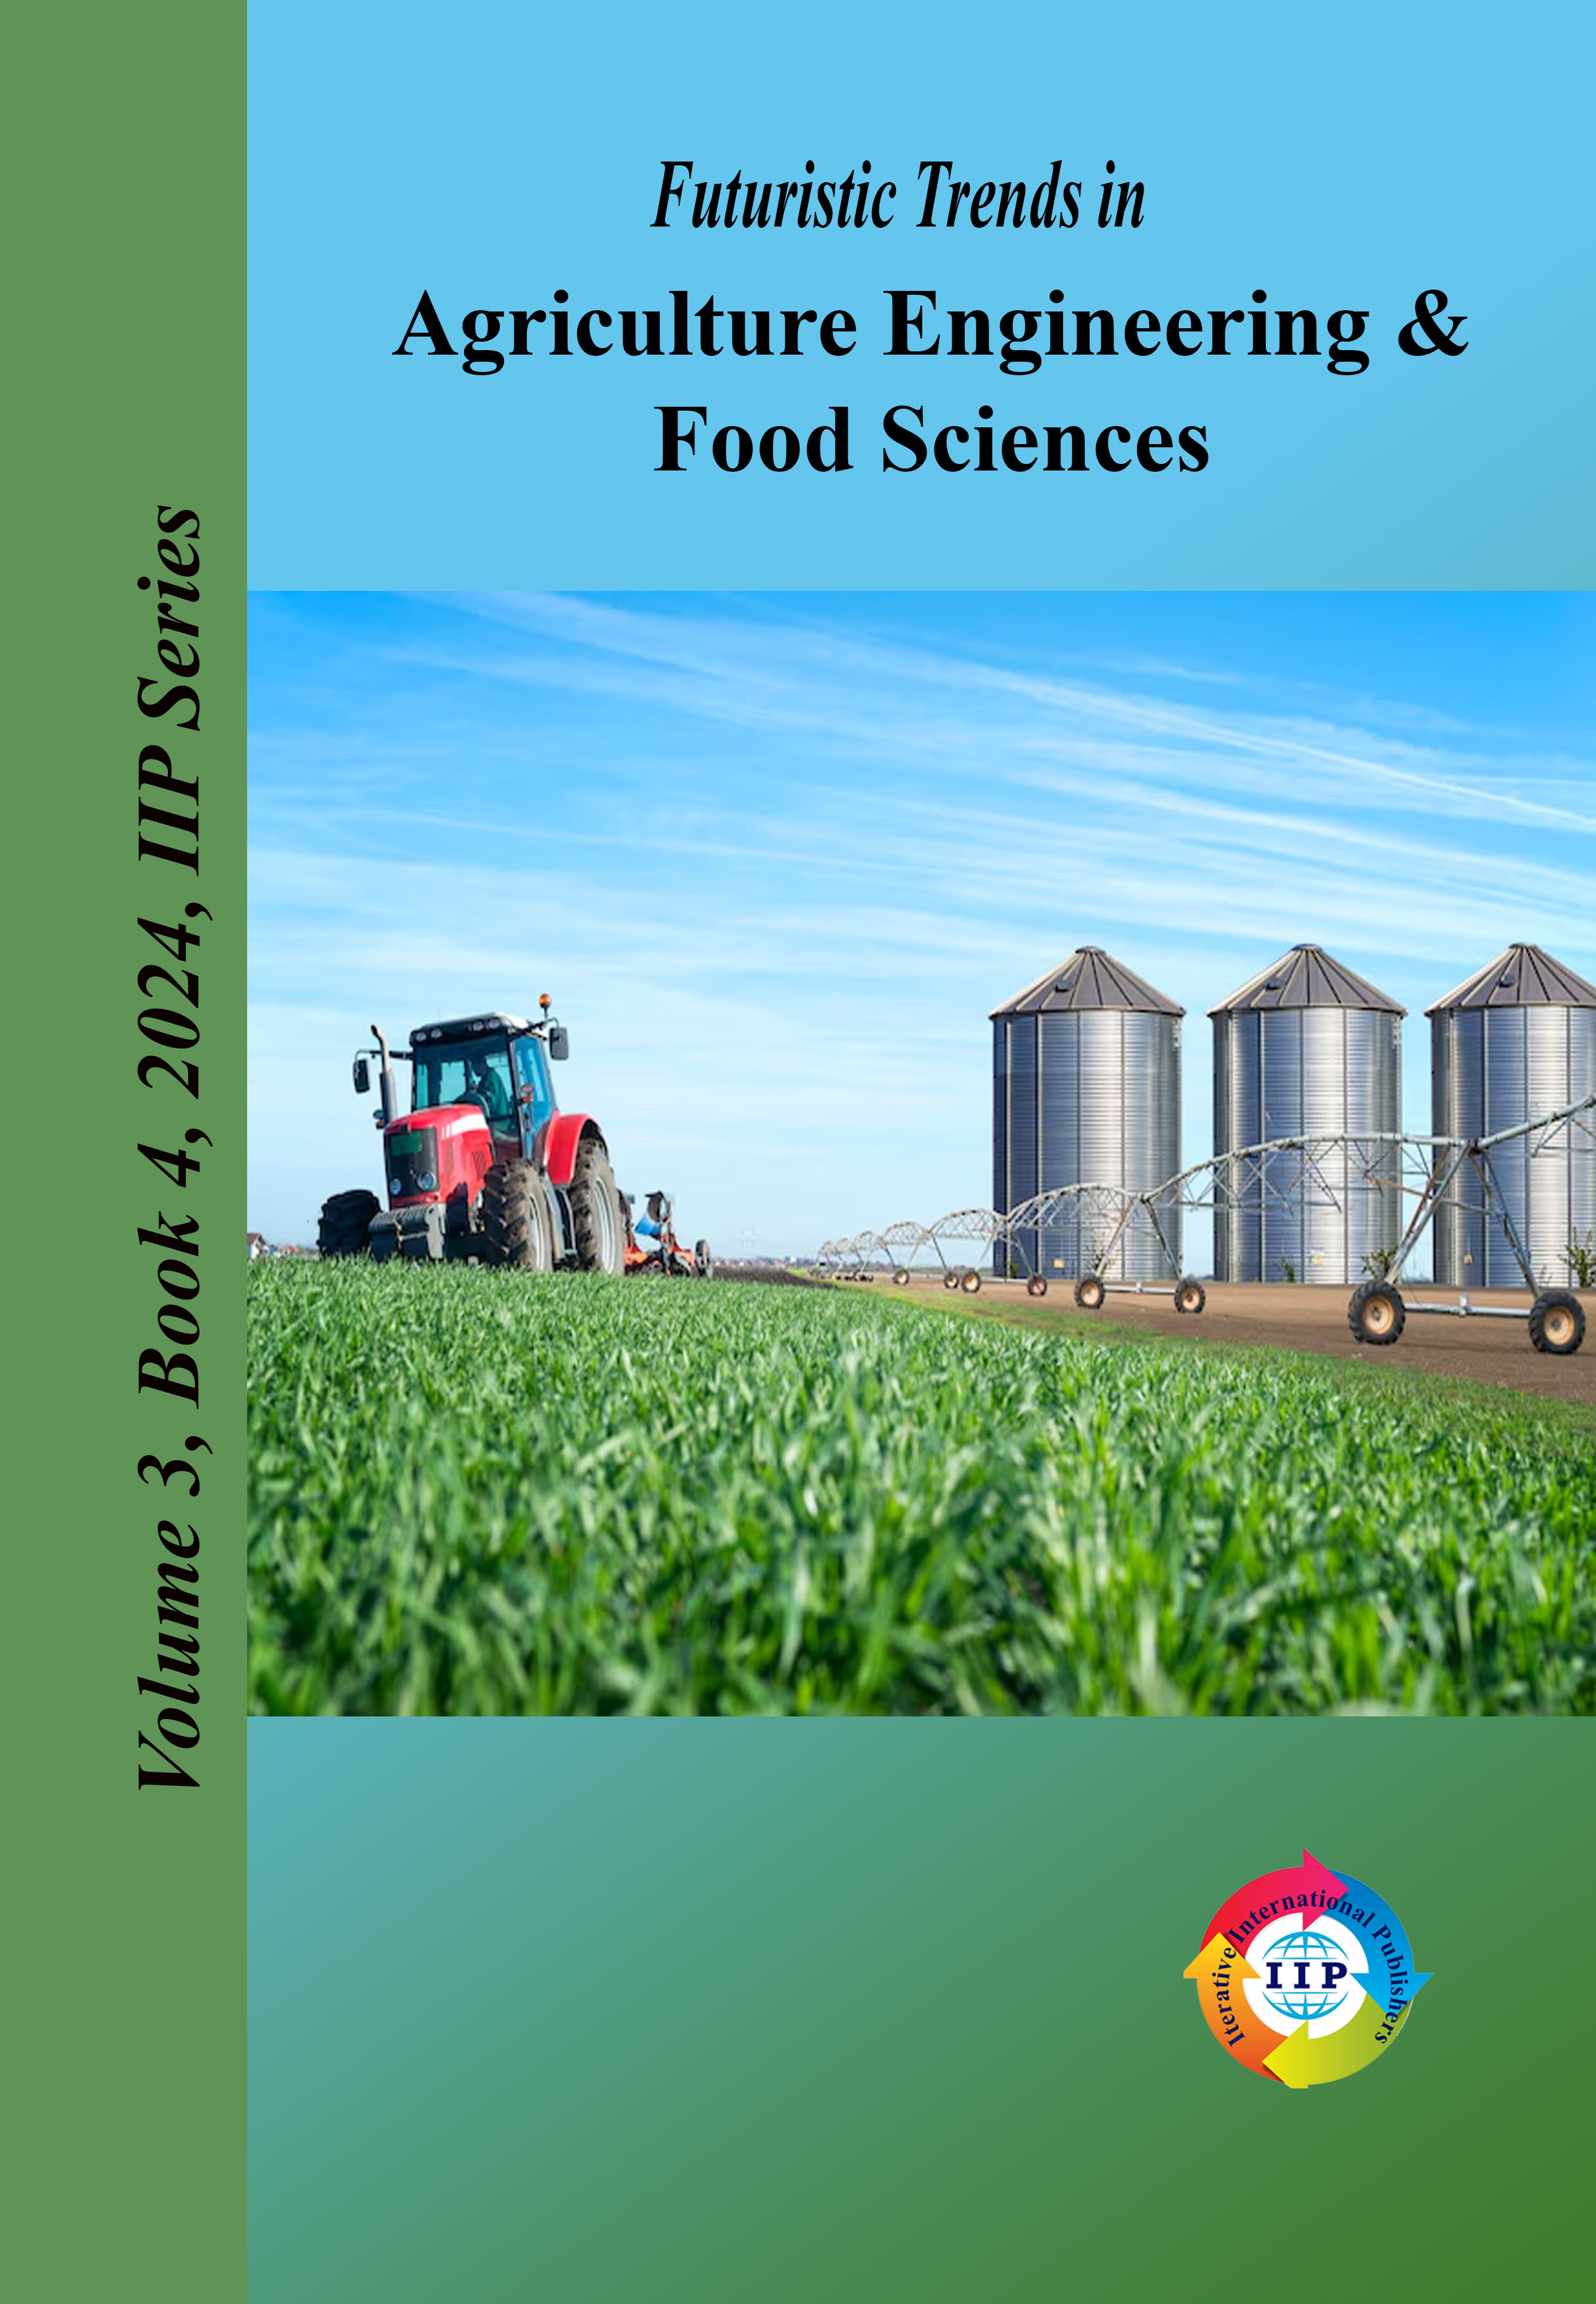 Futuristic Trends in Agriculture Engineering & Food Sciences Volume 3 Book 4